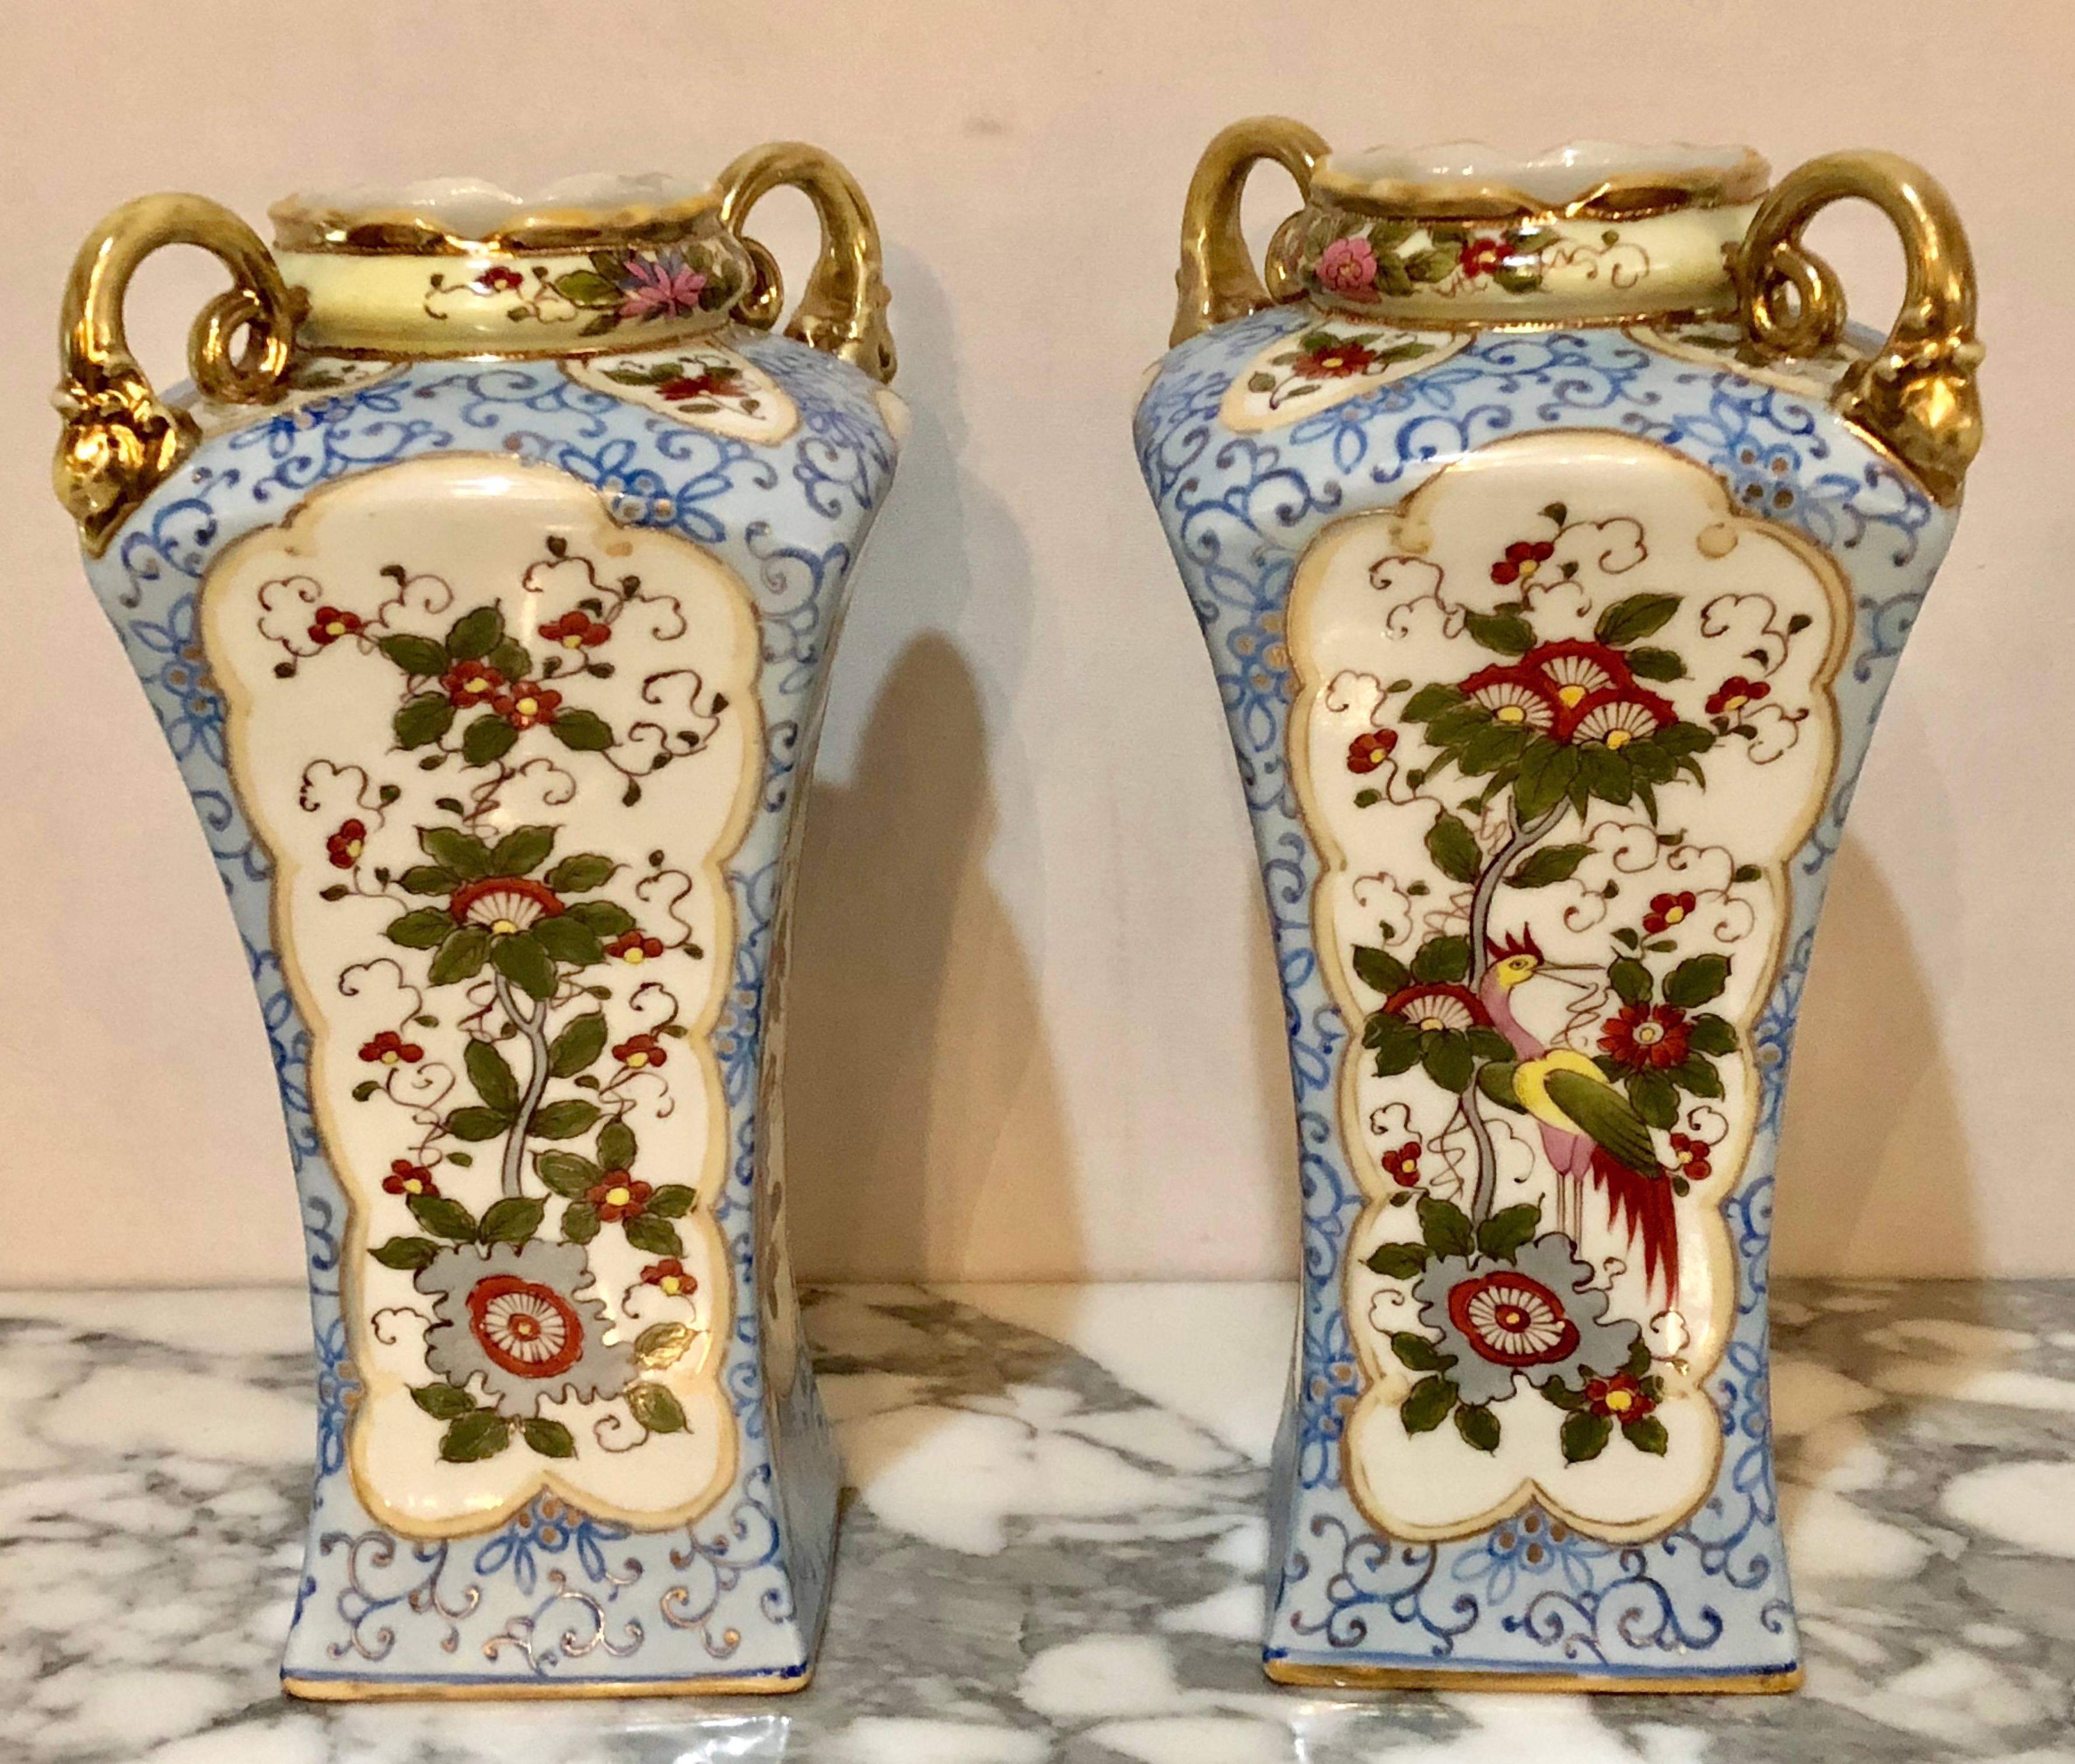 A pair of Chinese Chippendale style twin handled Nippon vases. Each of these hand-painted vases have gilt gold handles, rims and bases as well as framing to separate the finely cast design on these highly decorative and collectable vases. The pair